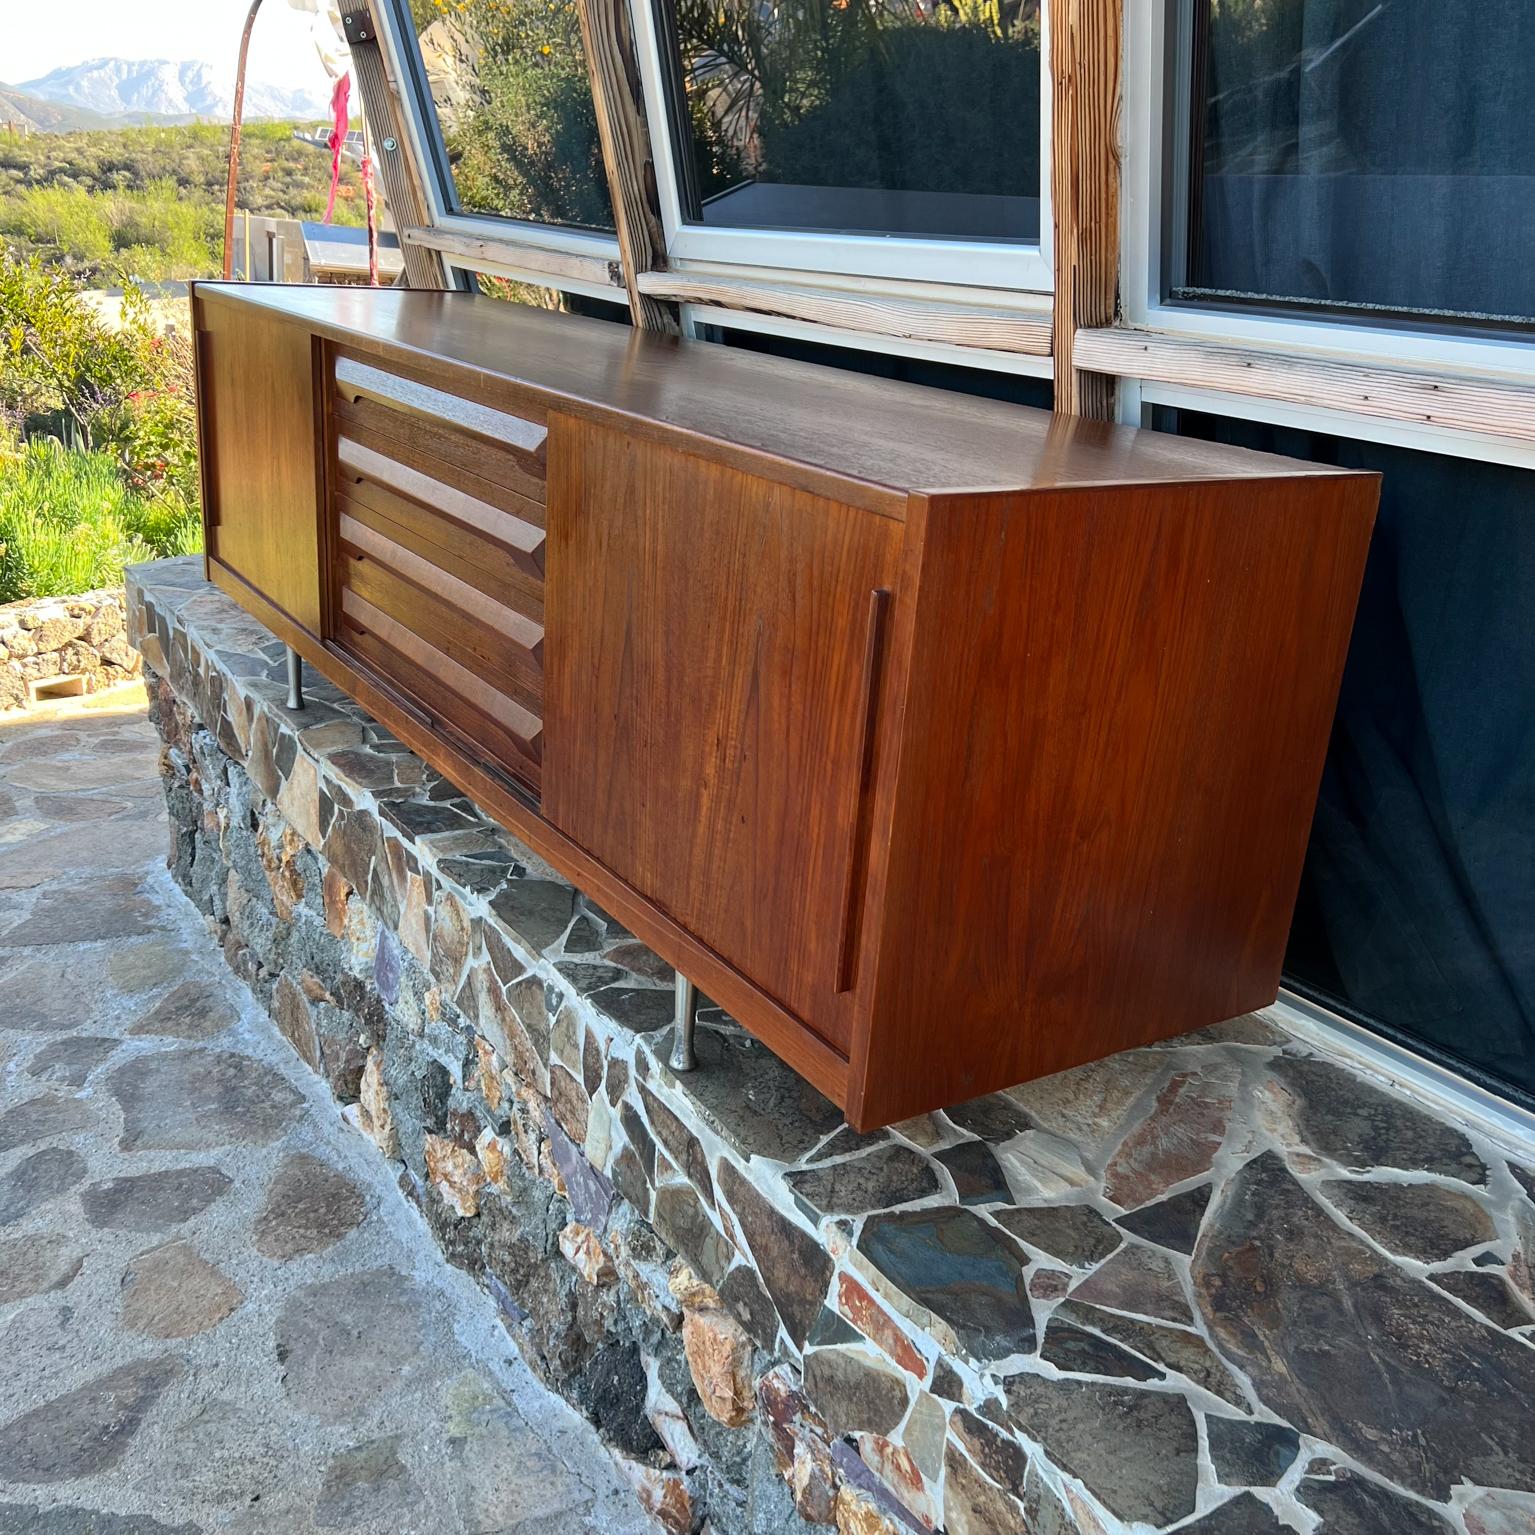 1960s Danish Mod Credenza Sideboard in Teakwood.
Stunning beauty.
In the Style of Johannes Andersen
Unmarked
Measures: 78.75 W x 20 D x 26.25 H.
Original preowned vintage condition.
Refer to images provided.
Delivery to LA OC Palm